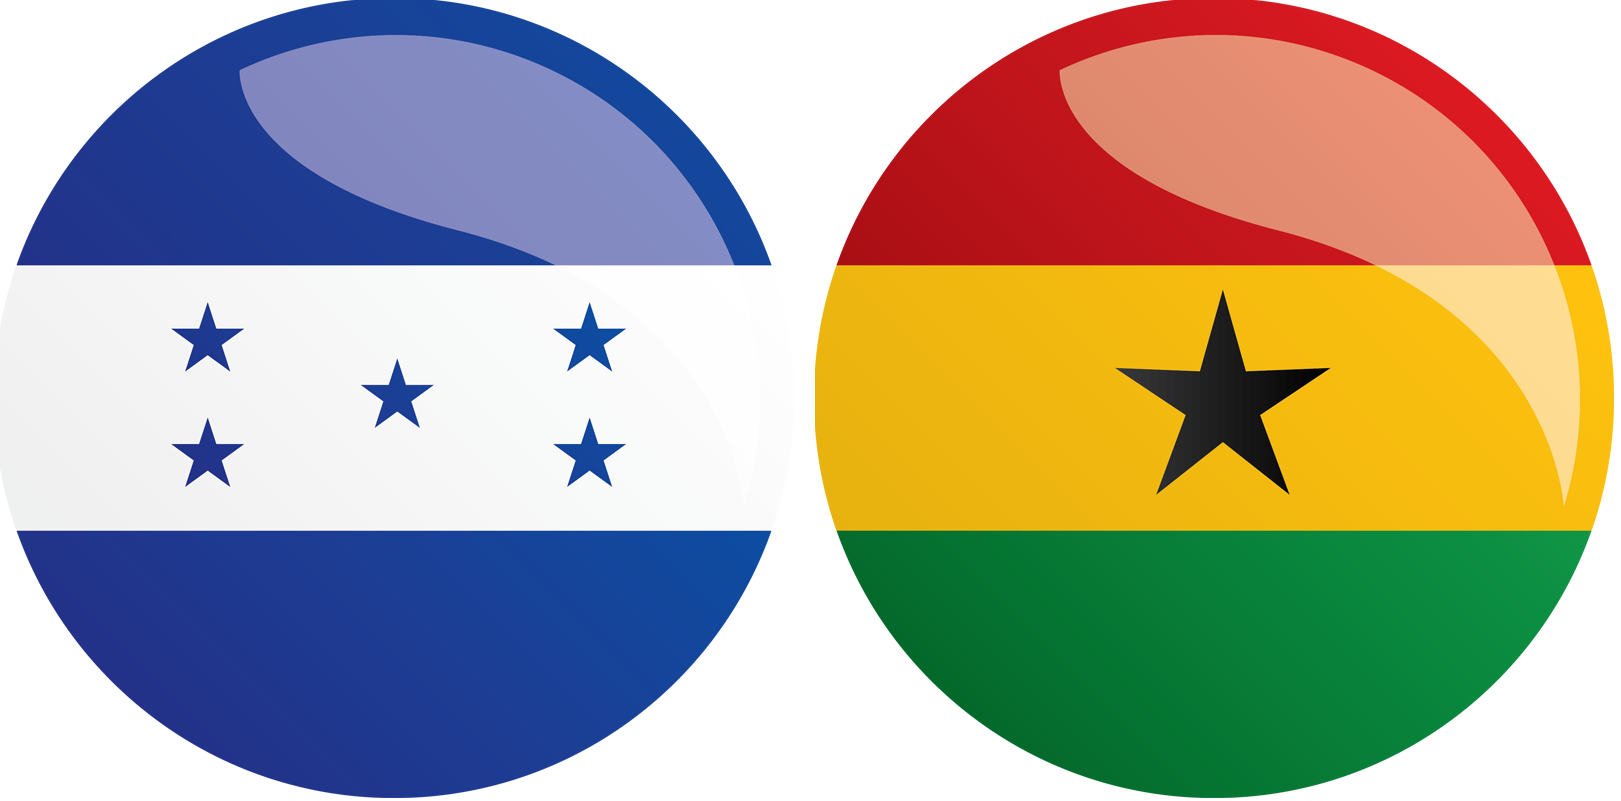 Honduras and Ghana become the 39th and 40th future Parties to the Minamata Convention on Mercury